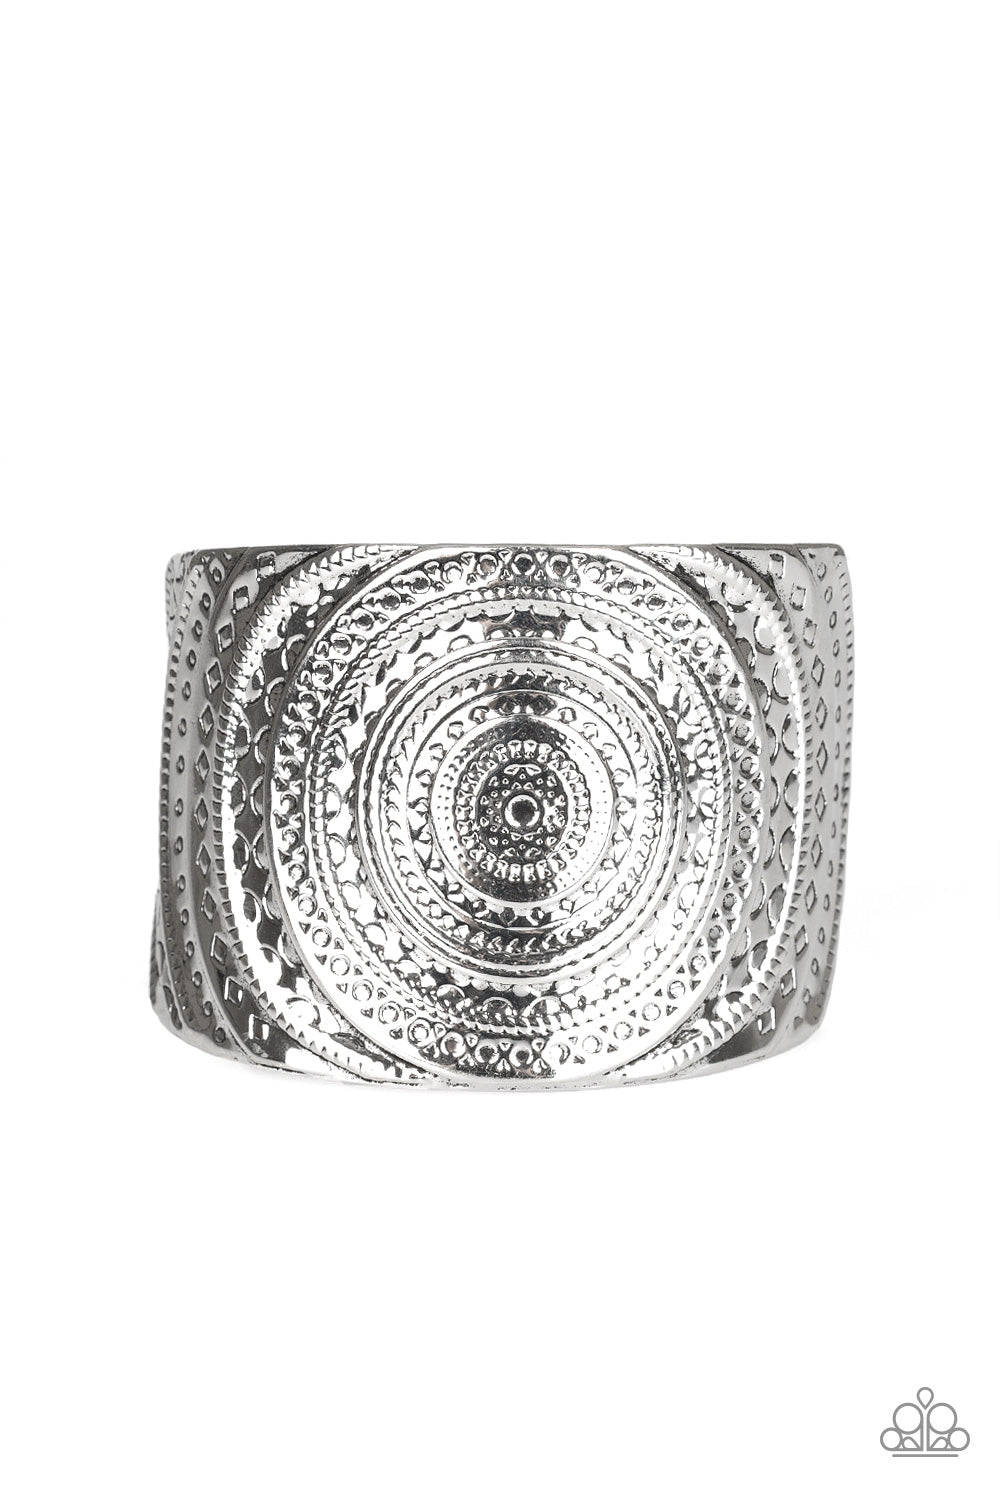 BARE YOUR SOL - SILVER TRIBAL BOLD CUFF BRACELET